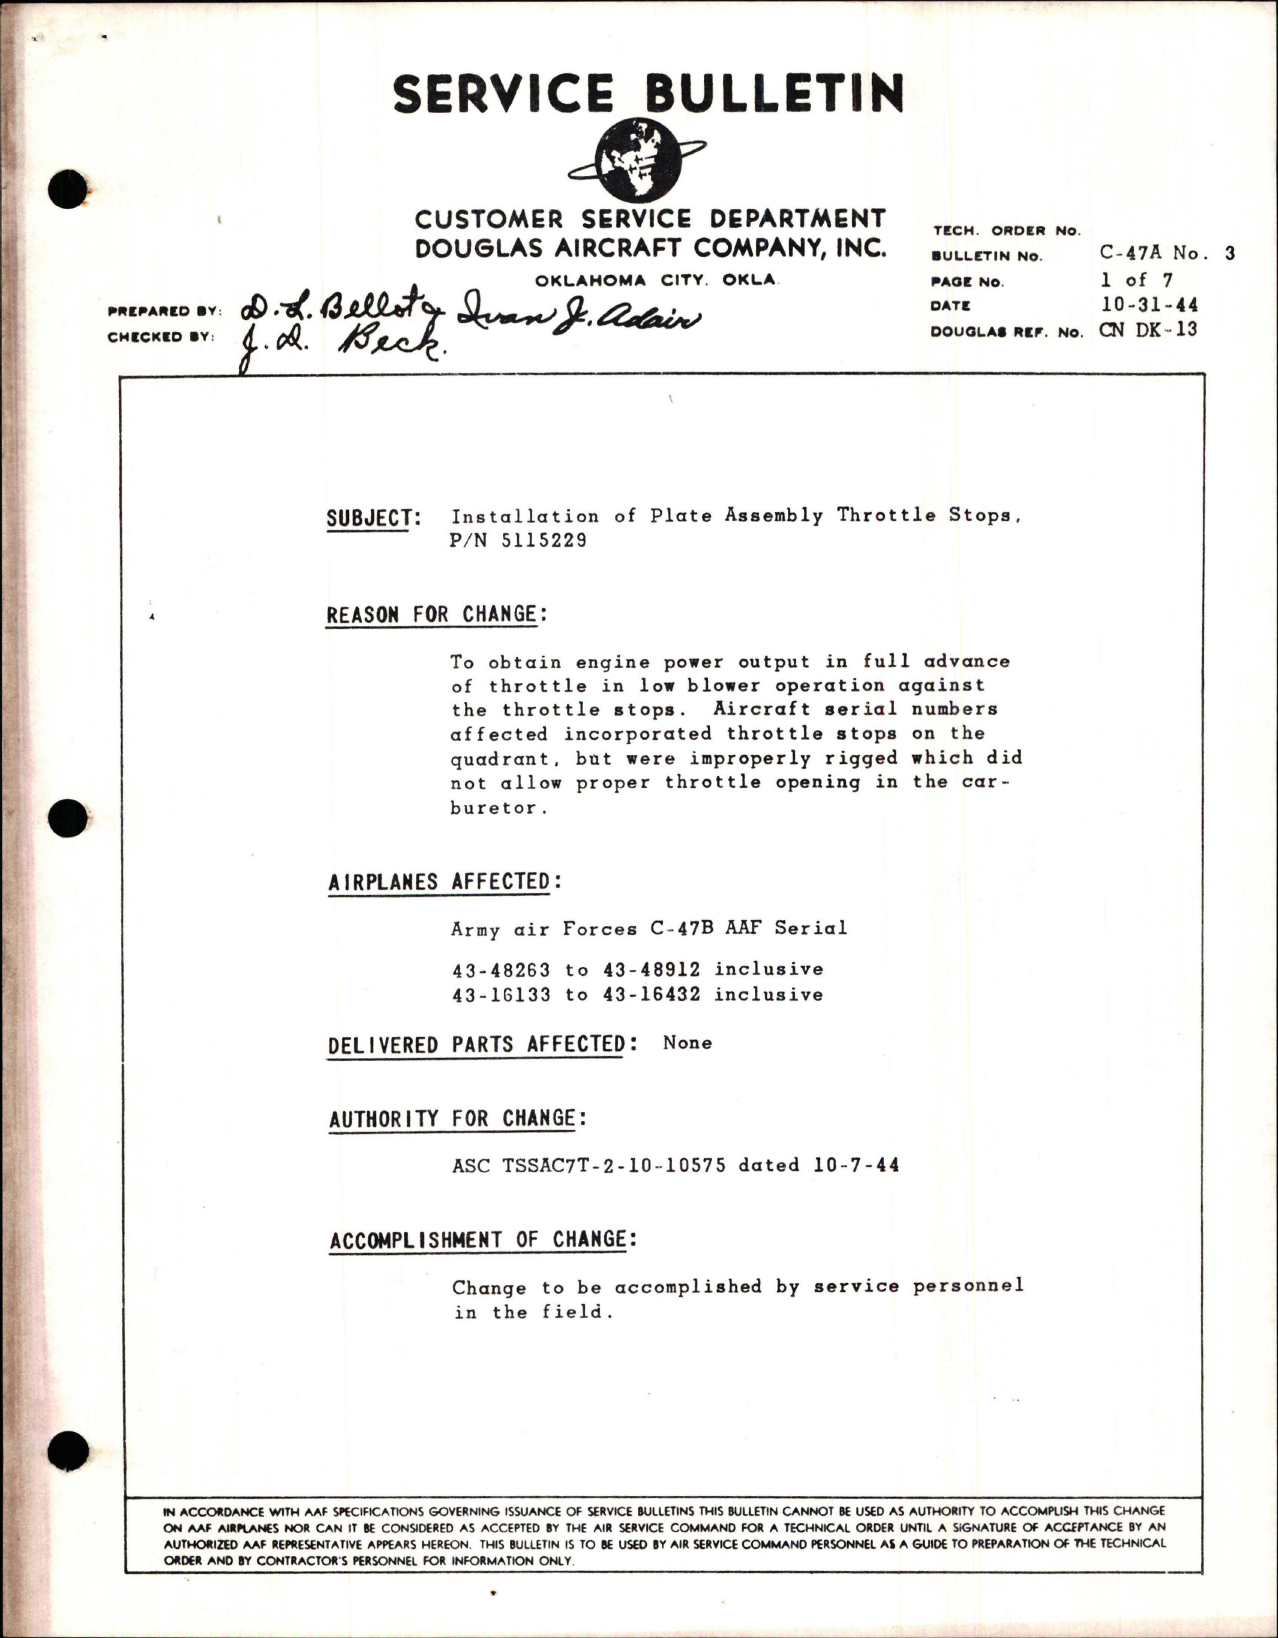 Sample page 1 from AirCorps Library document: Installation of Plate Assembly Throttle Shops - Part 5115229